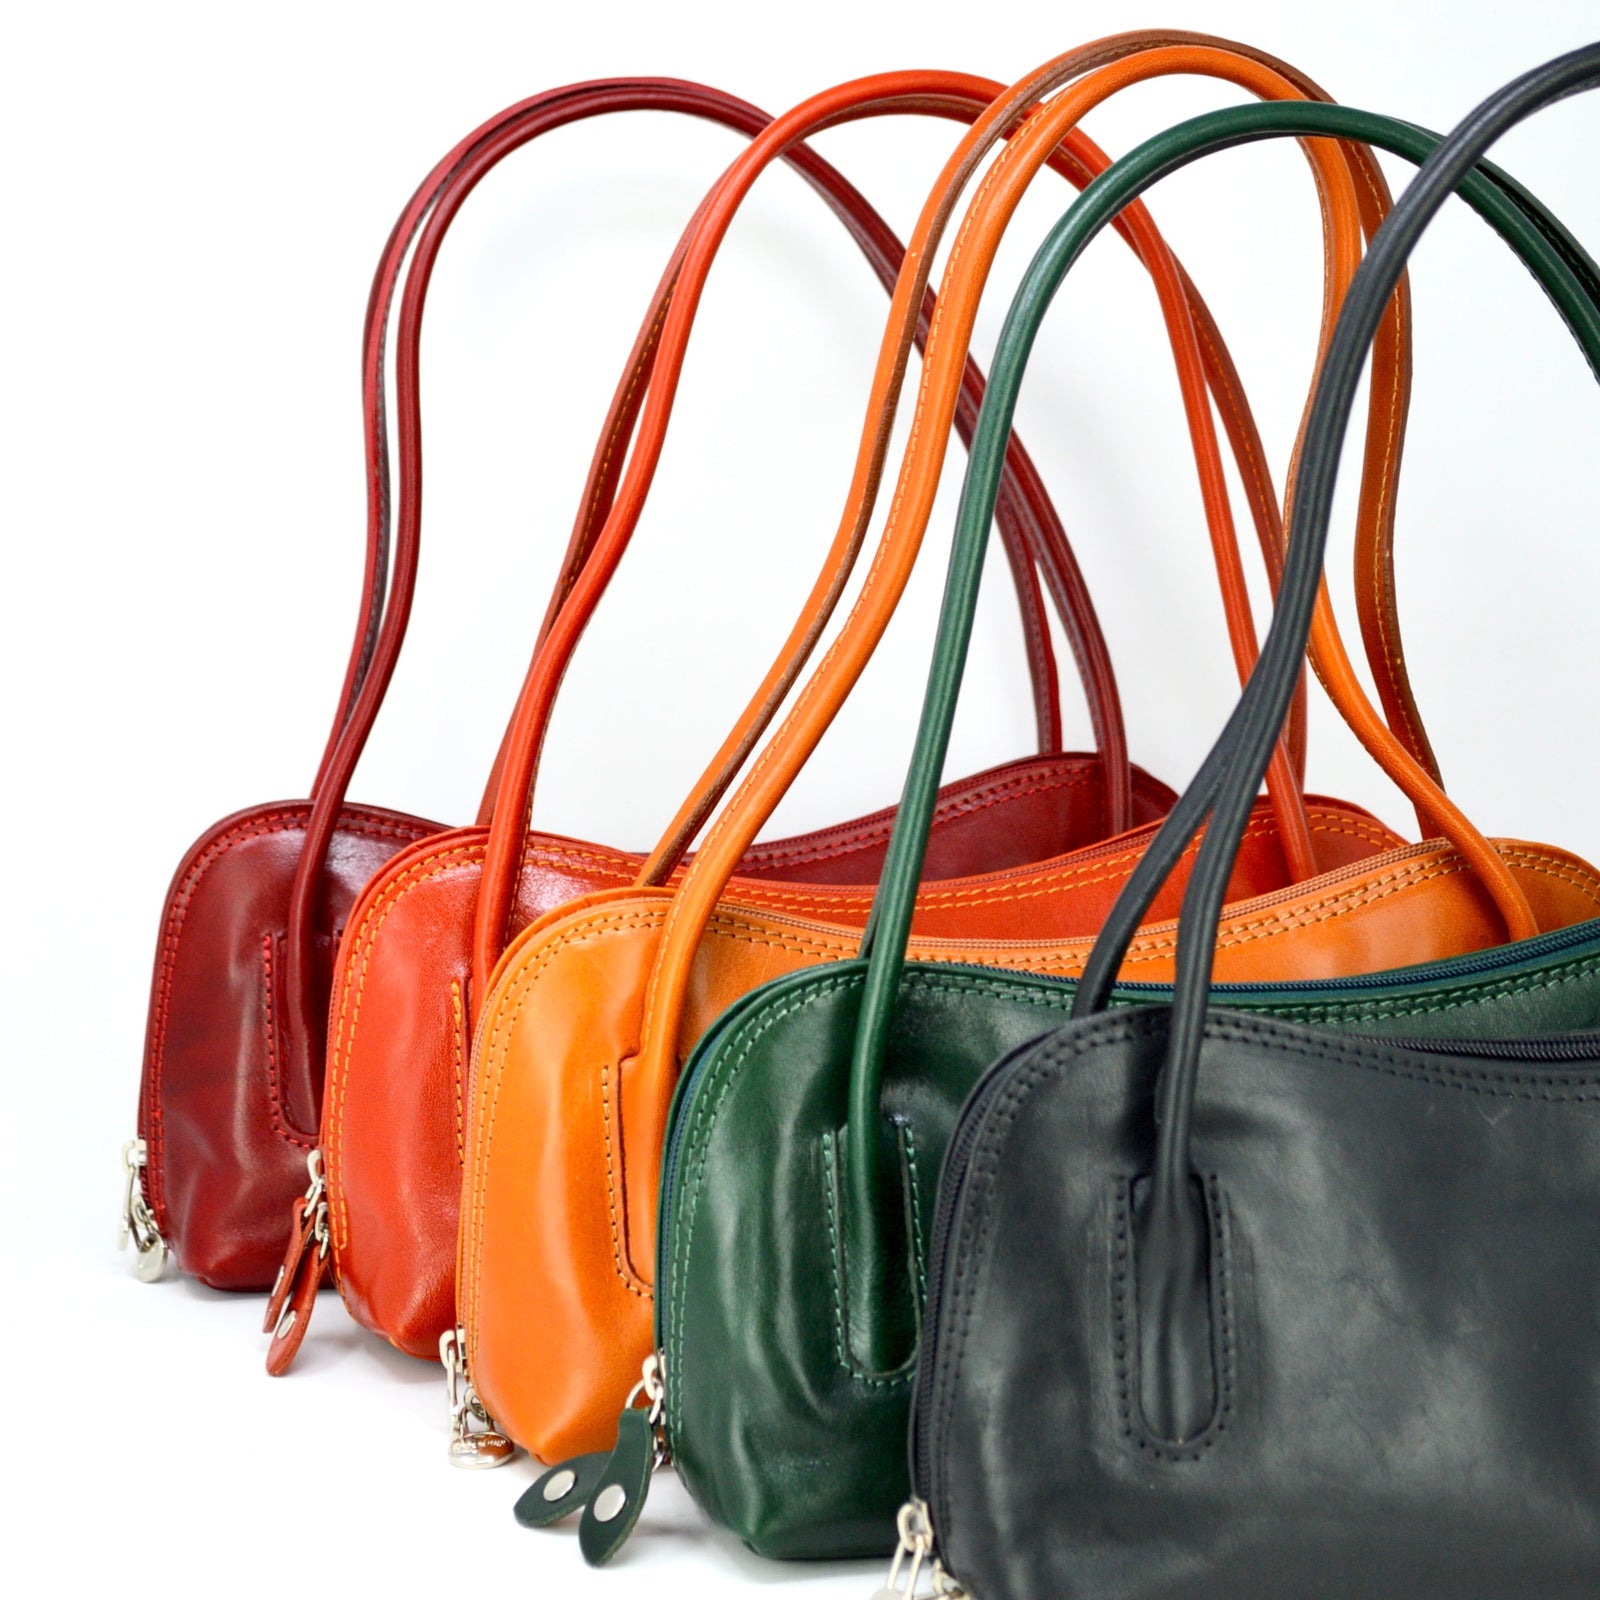 Italian Leather Bags - Buy Online at Domini Leather